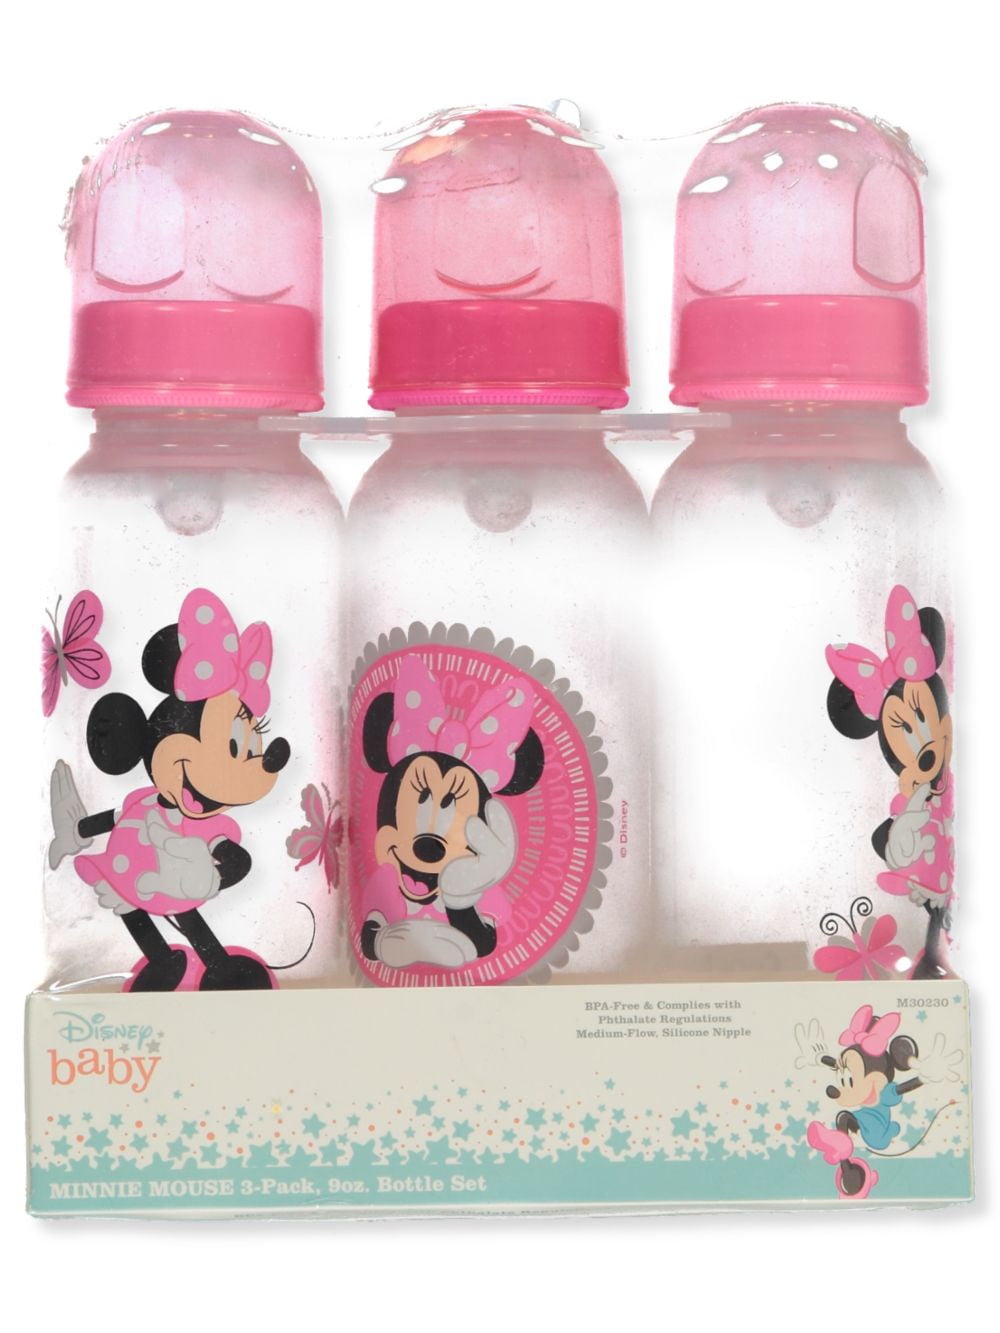 Minnie Mouse Three Pack Deluxe Bottle Set Baby Disney New 